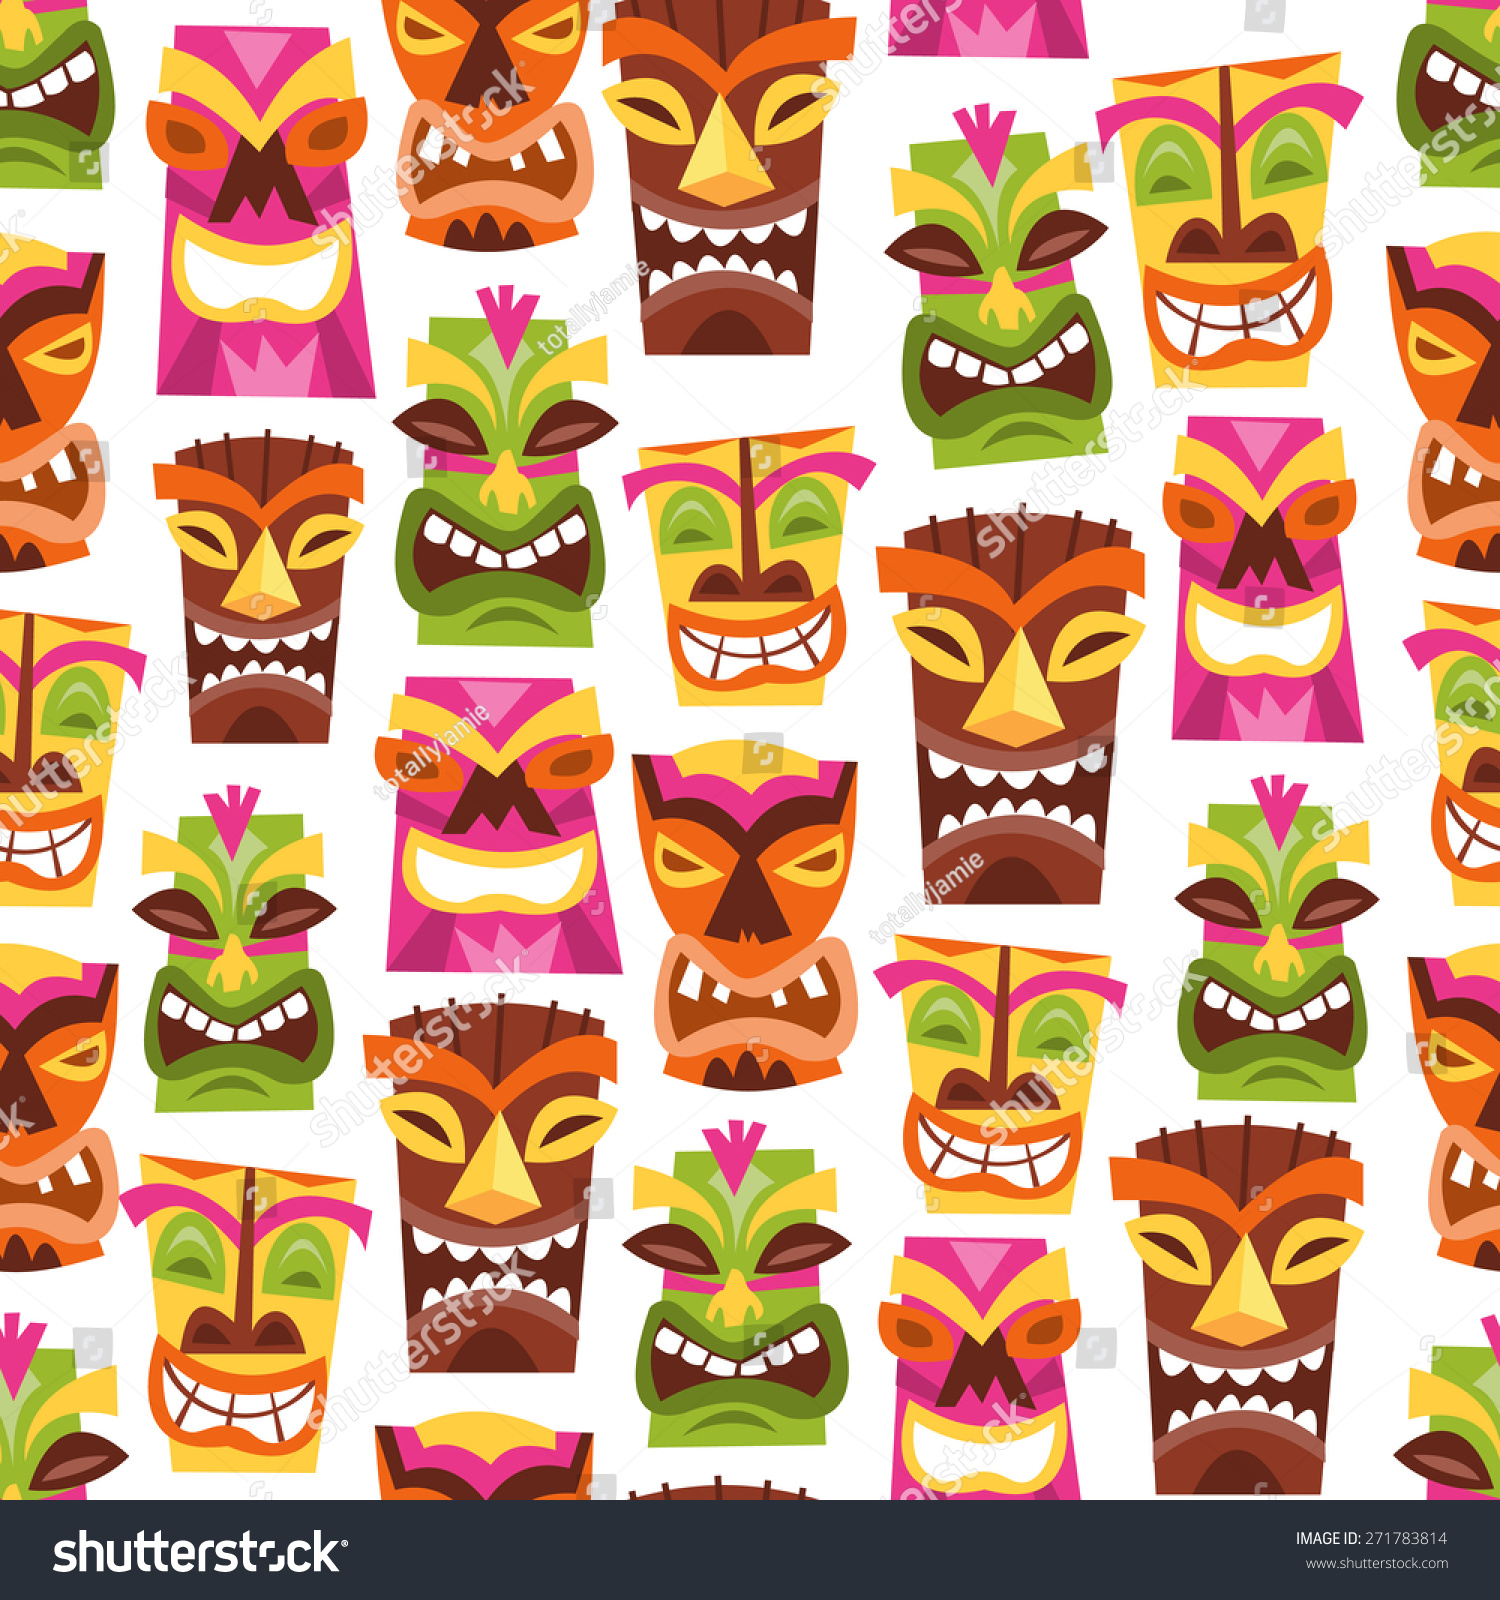 SVG of A vector illustration of 1960s retro inspired cute hawaiian luau party tiki statues seamless pattern background.  svg